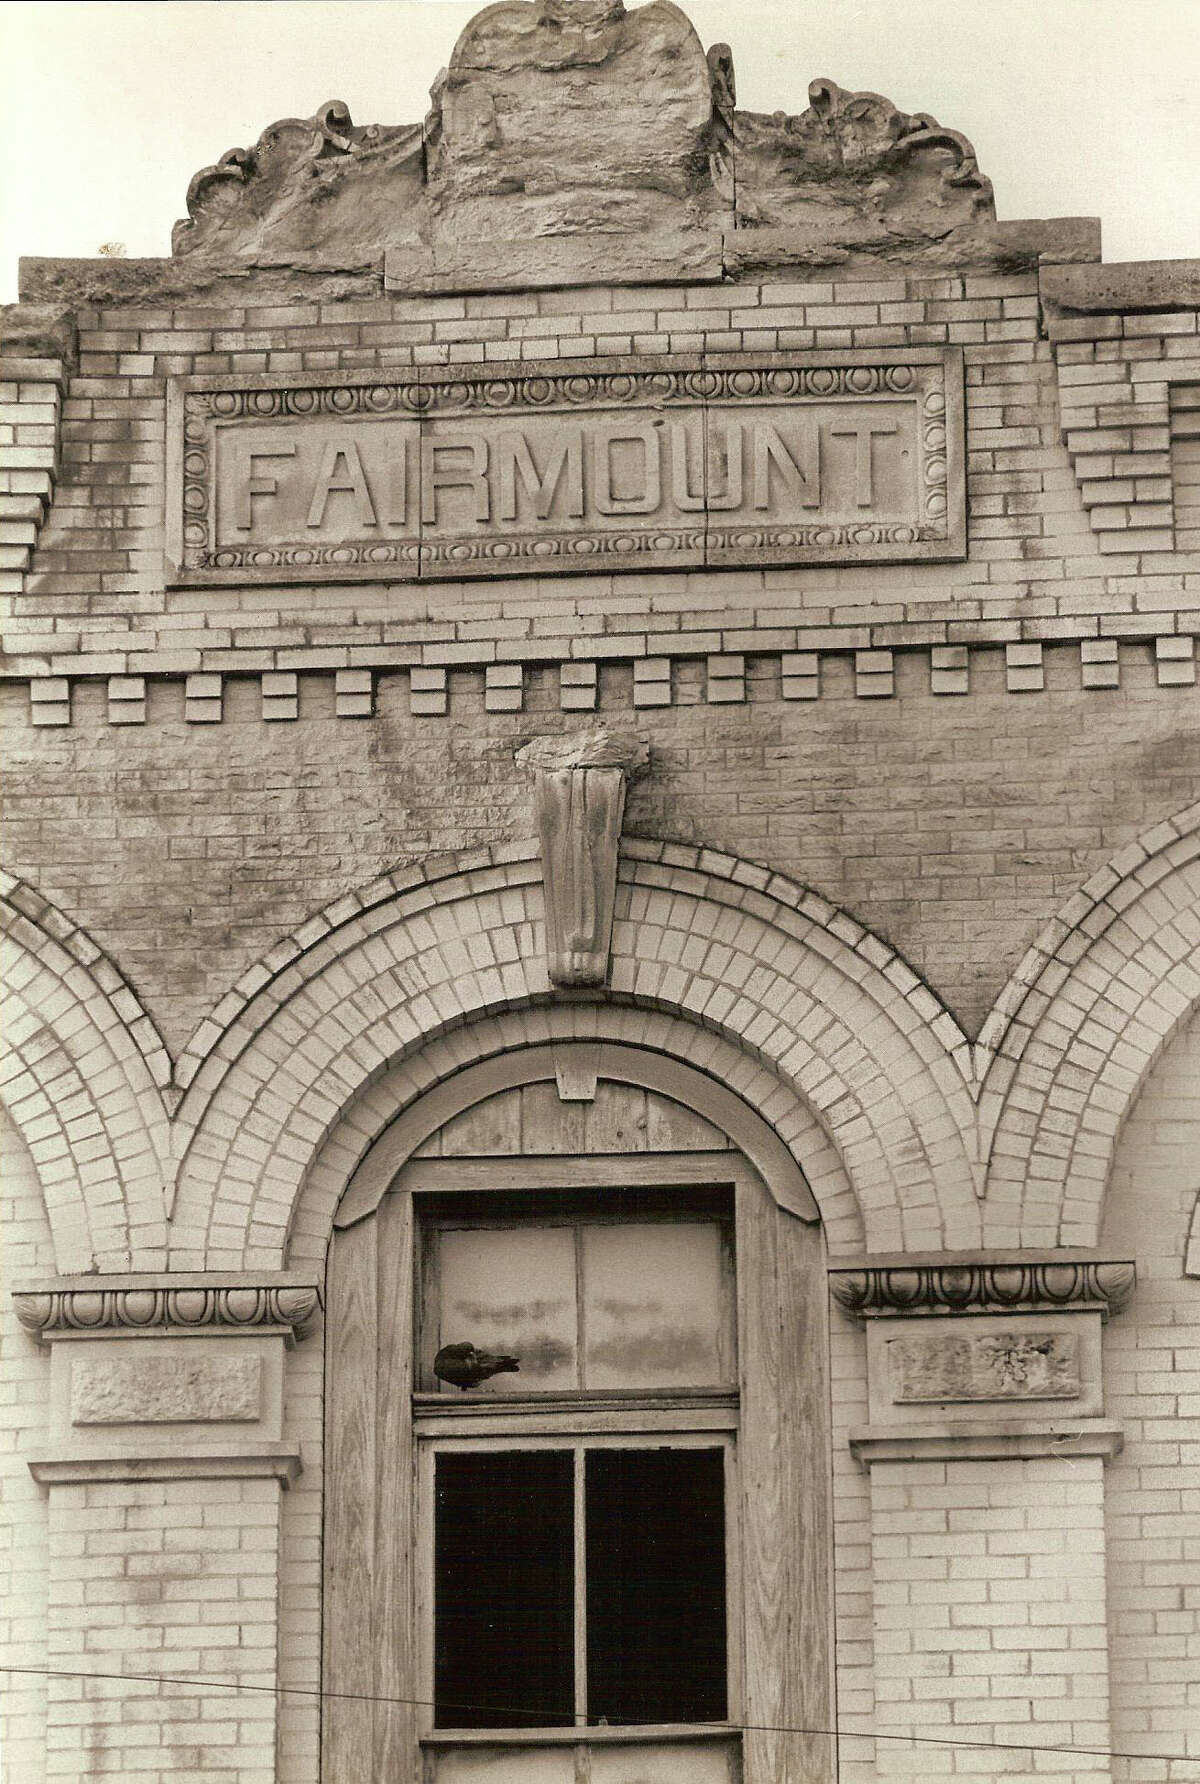 March 21, 1984 - The Fairmont Hotel was built at the intersection of Bowie and Commerce streets in 1906. In 1984, the fate of the hotel was under debate in order to make room for retail and lodging, which later became the Marriott Rivercenter Hotel